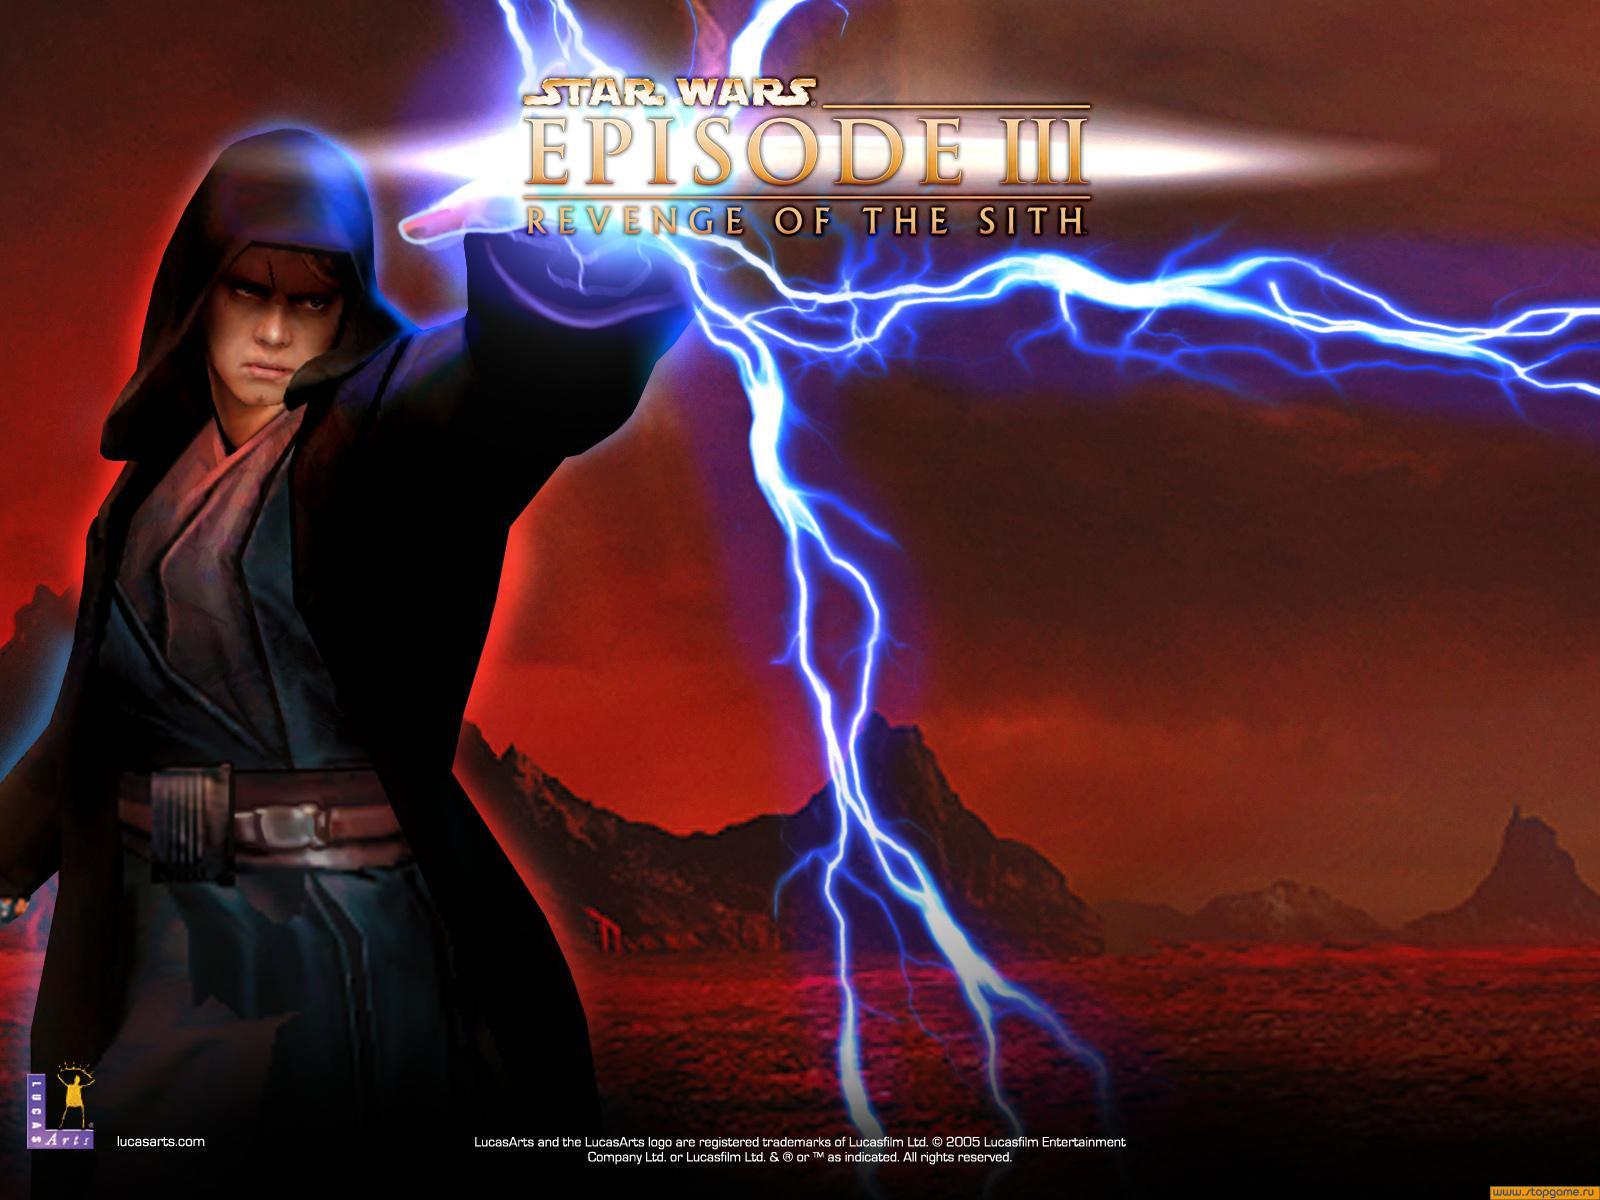 Star wars episode 3 revenge of the sith download free